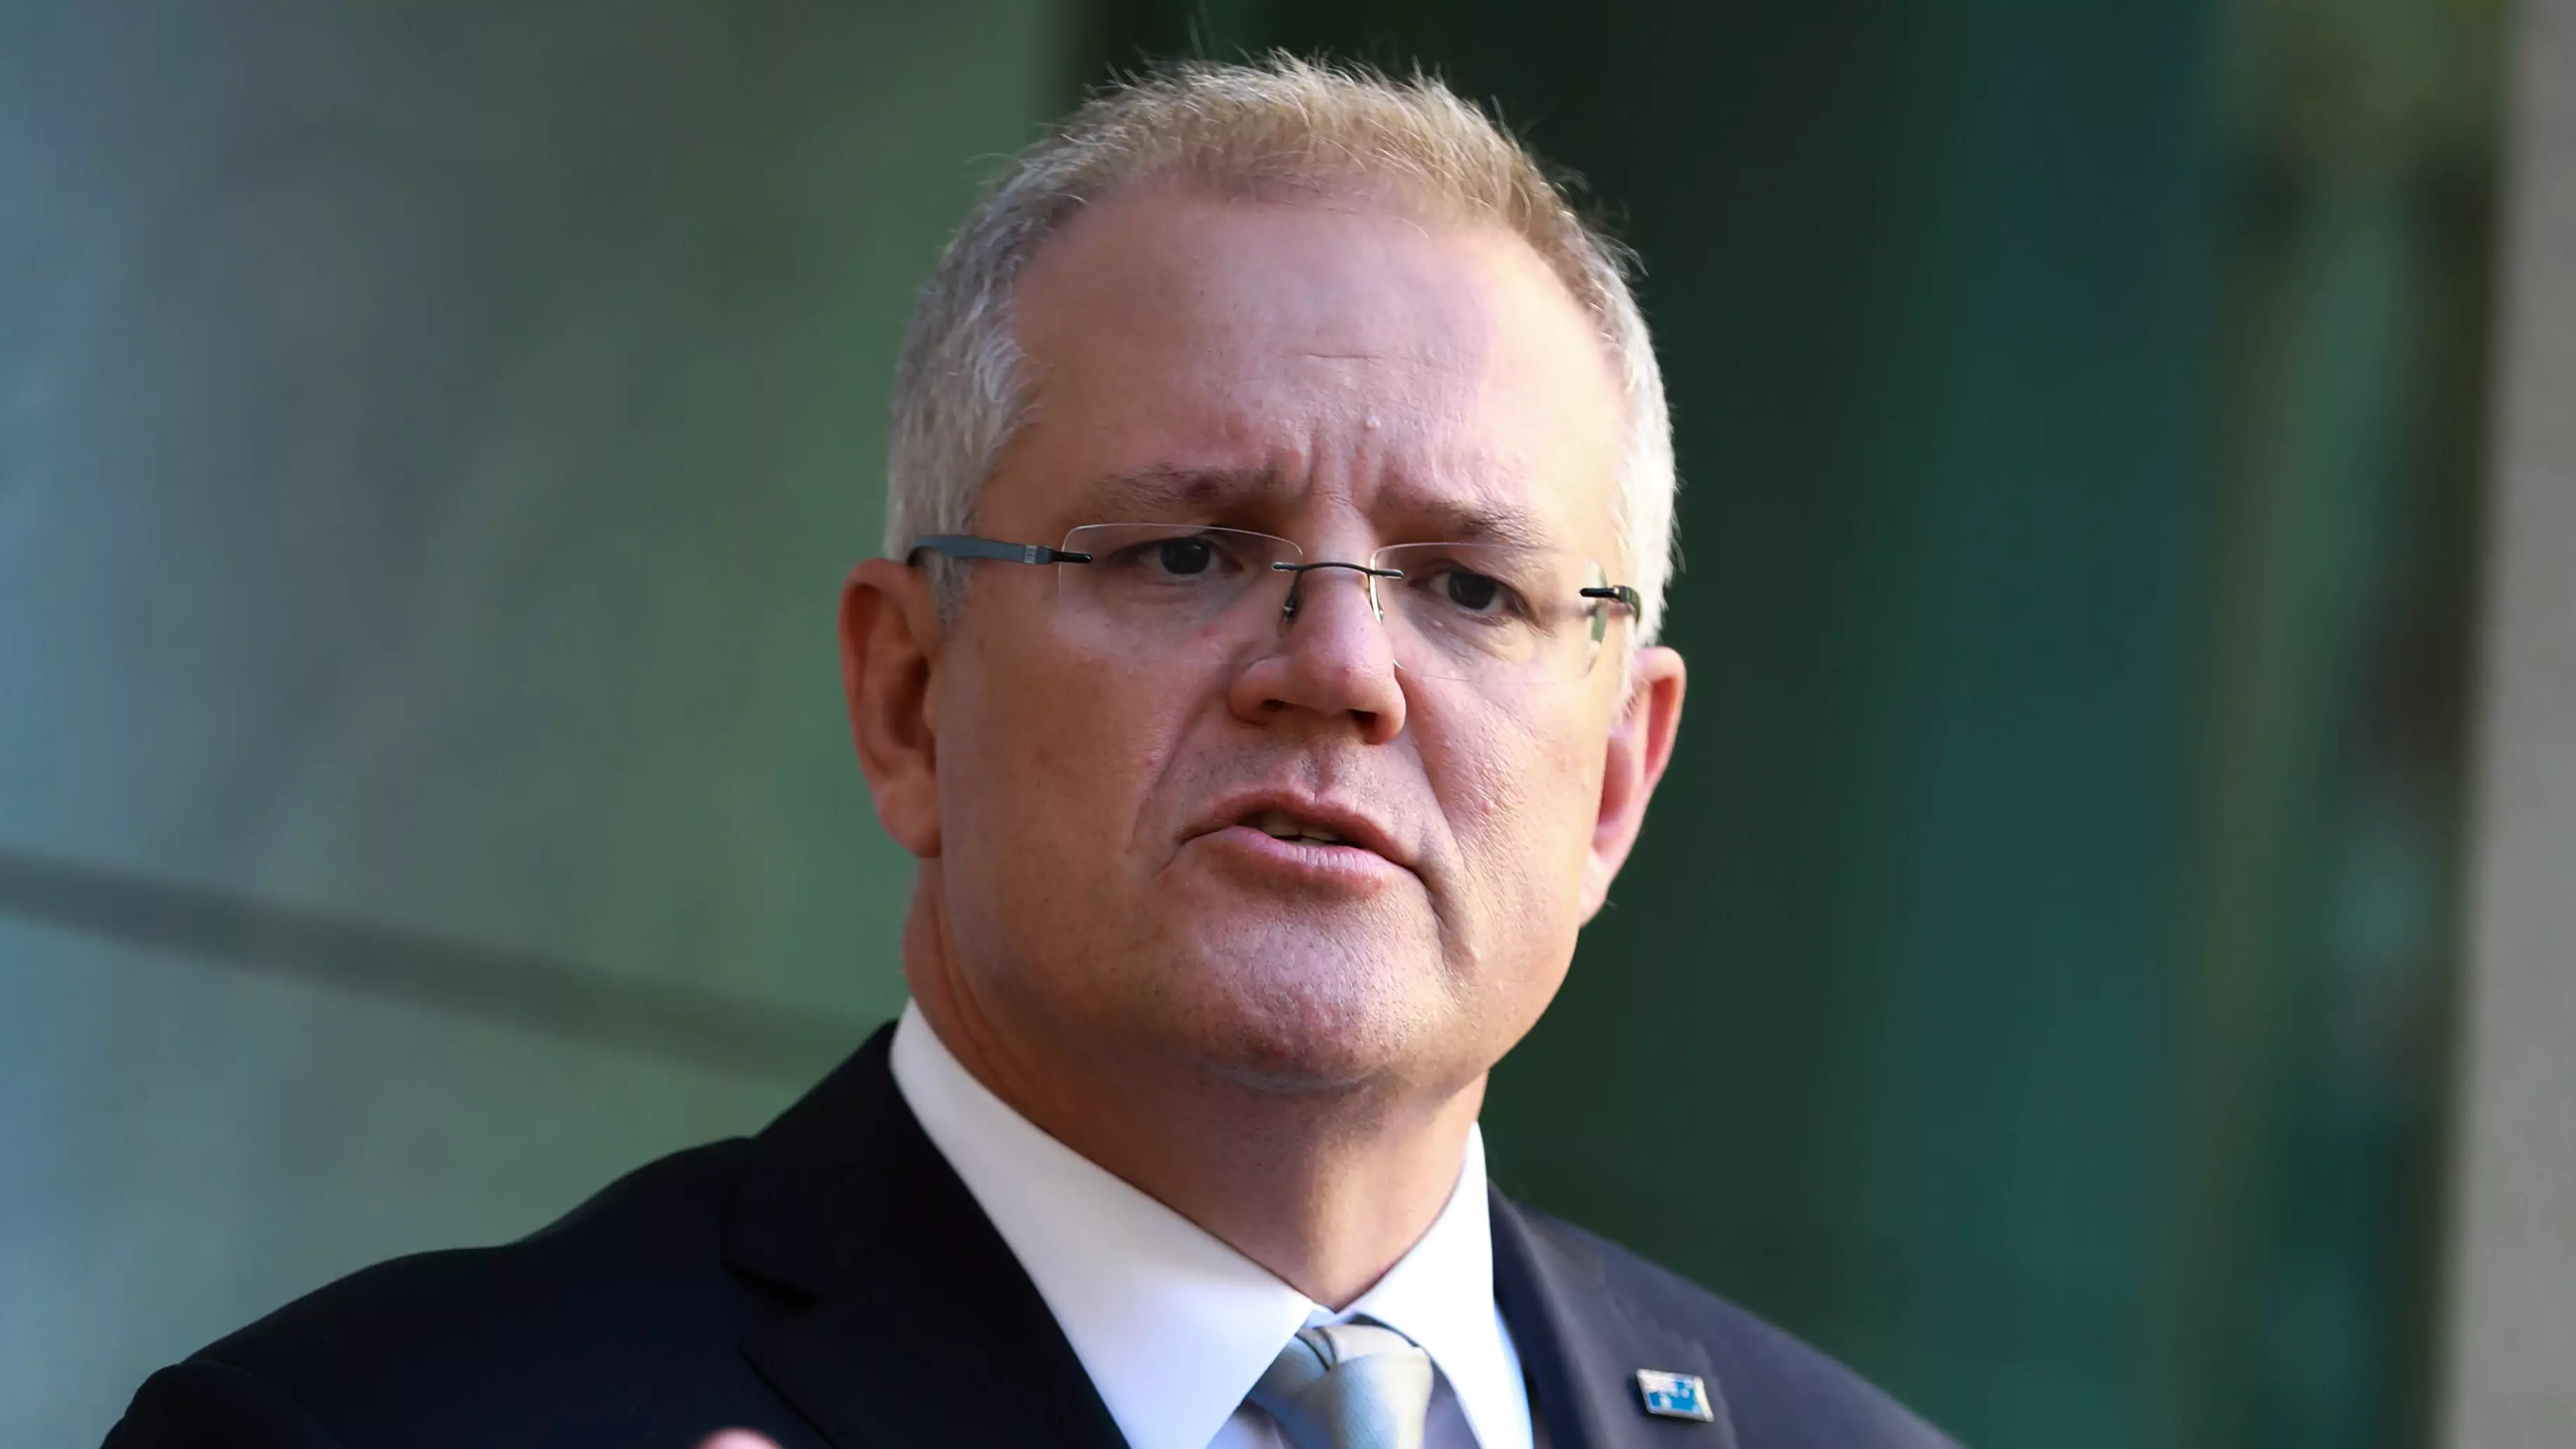 China Calls Scott Morrison 'Arrogant' For Wanting An Apology Over Fake Soldier Image